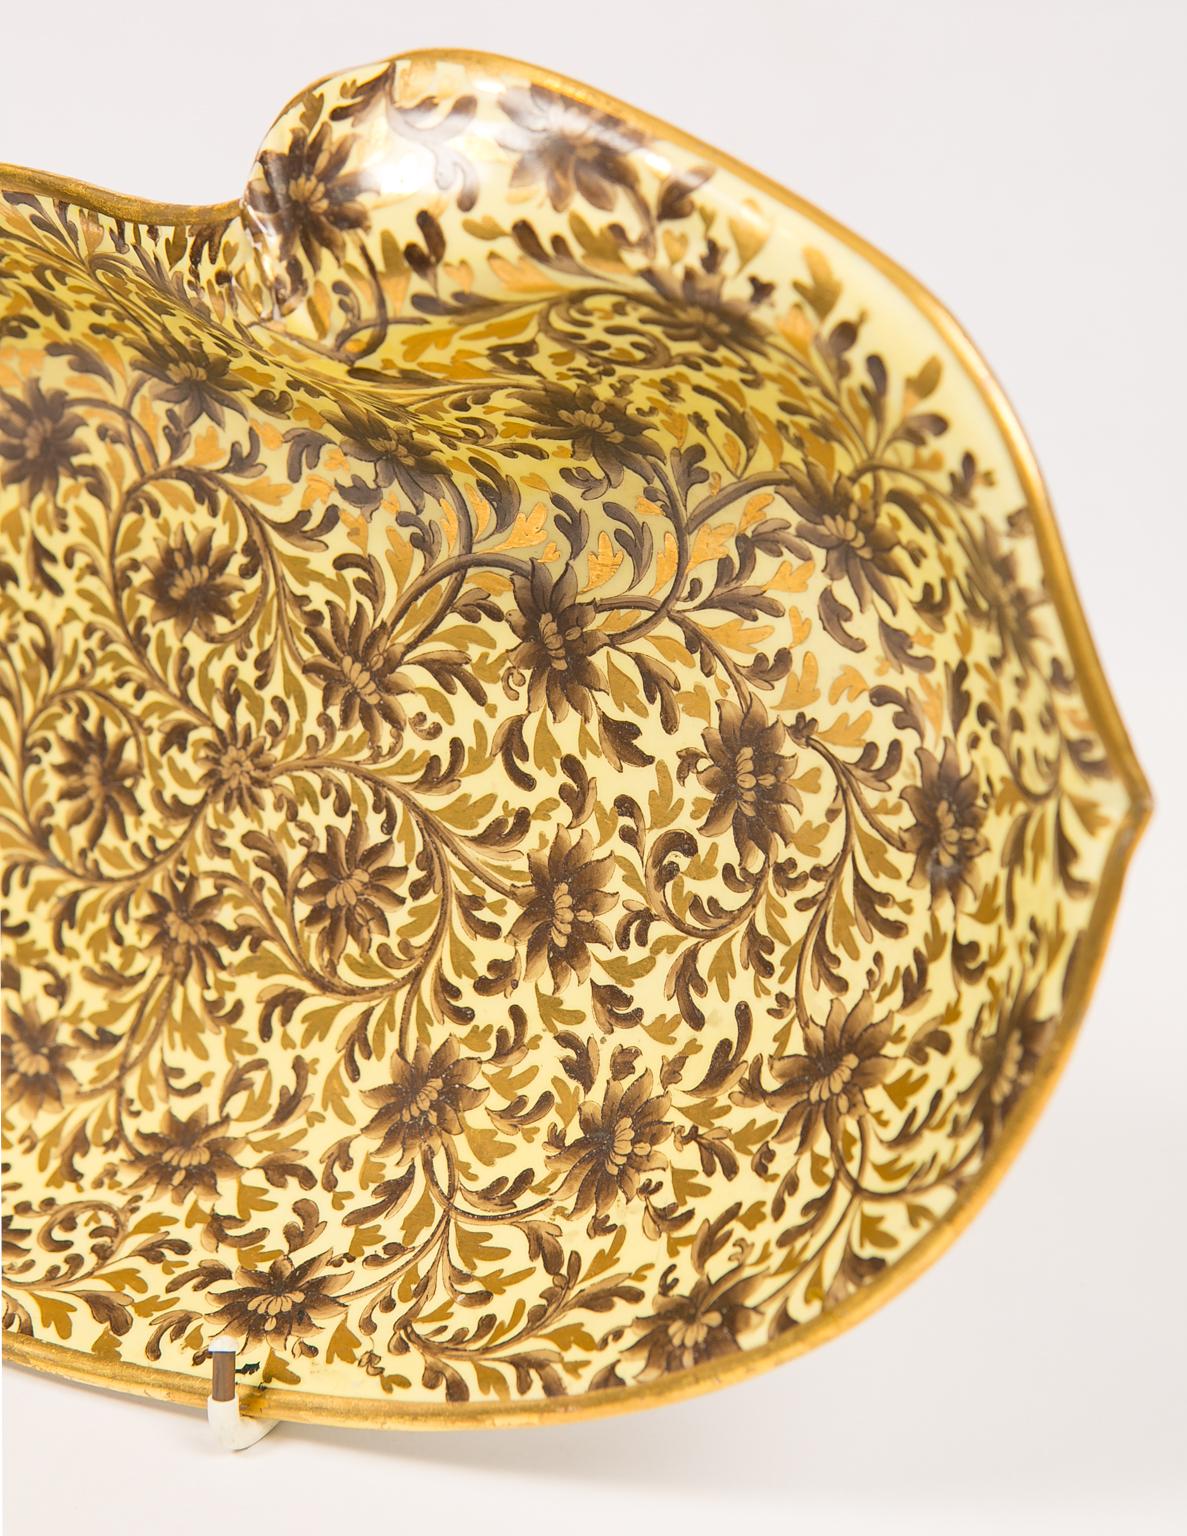 Regency Antique English Pottery Shell Shaped Dish with Yellow Ground Made circa 1820 For Sale